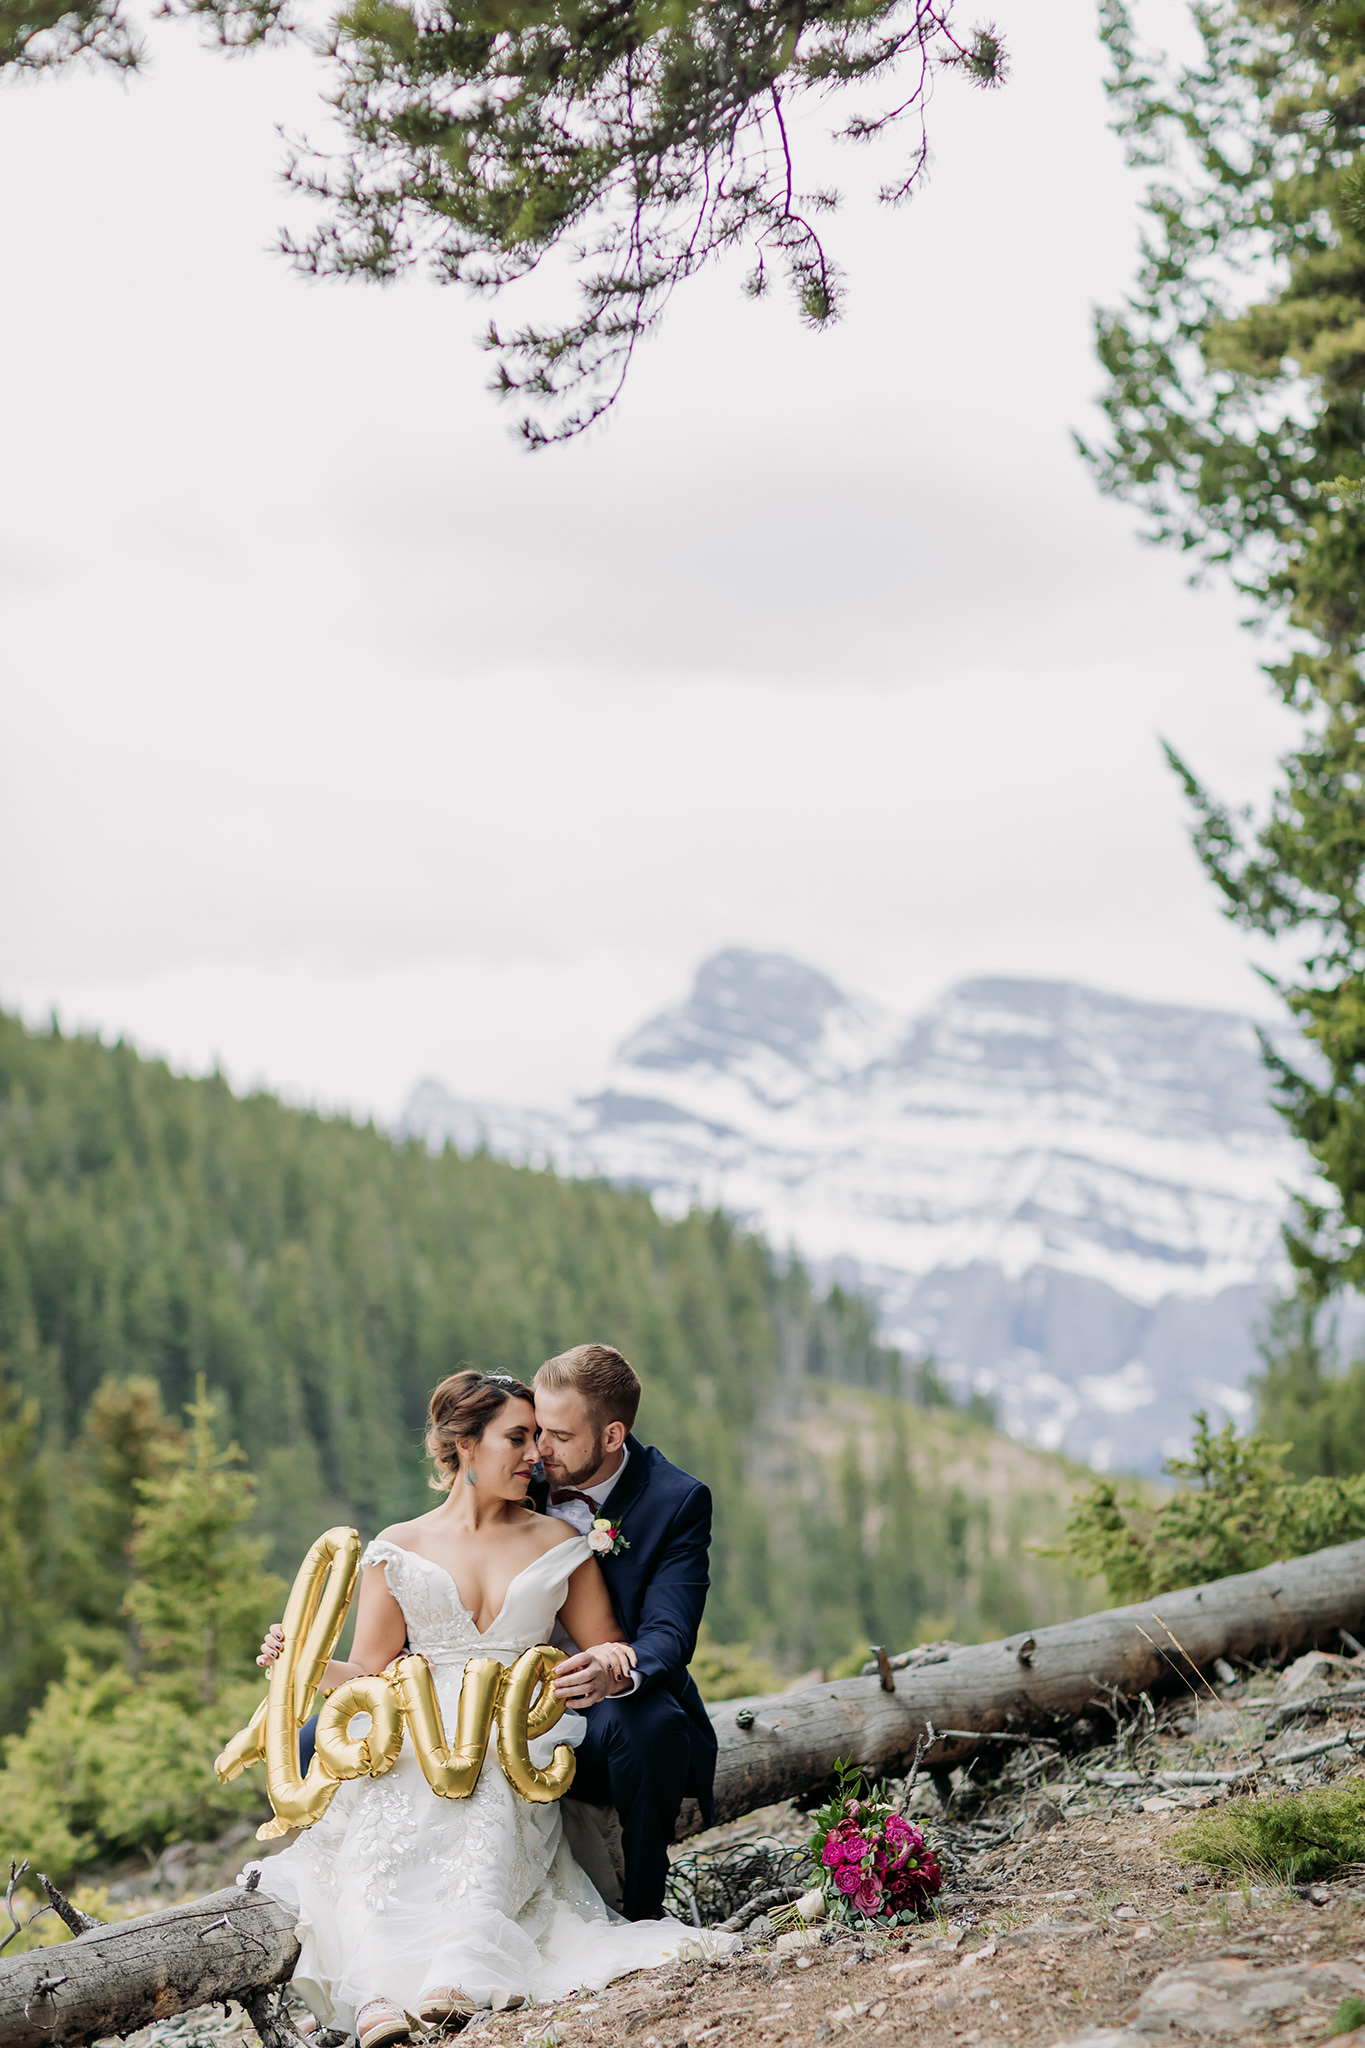 Intimate wedding portraits in Banff with cute gold foil LOVE balloon